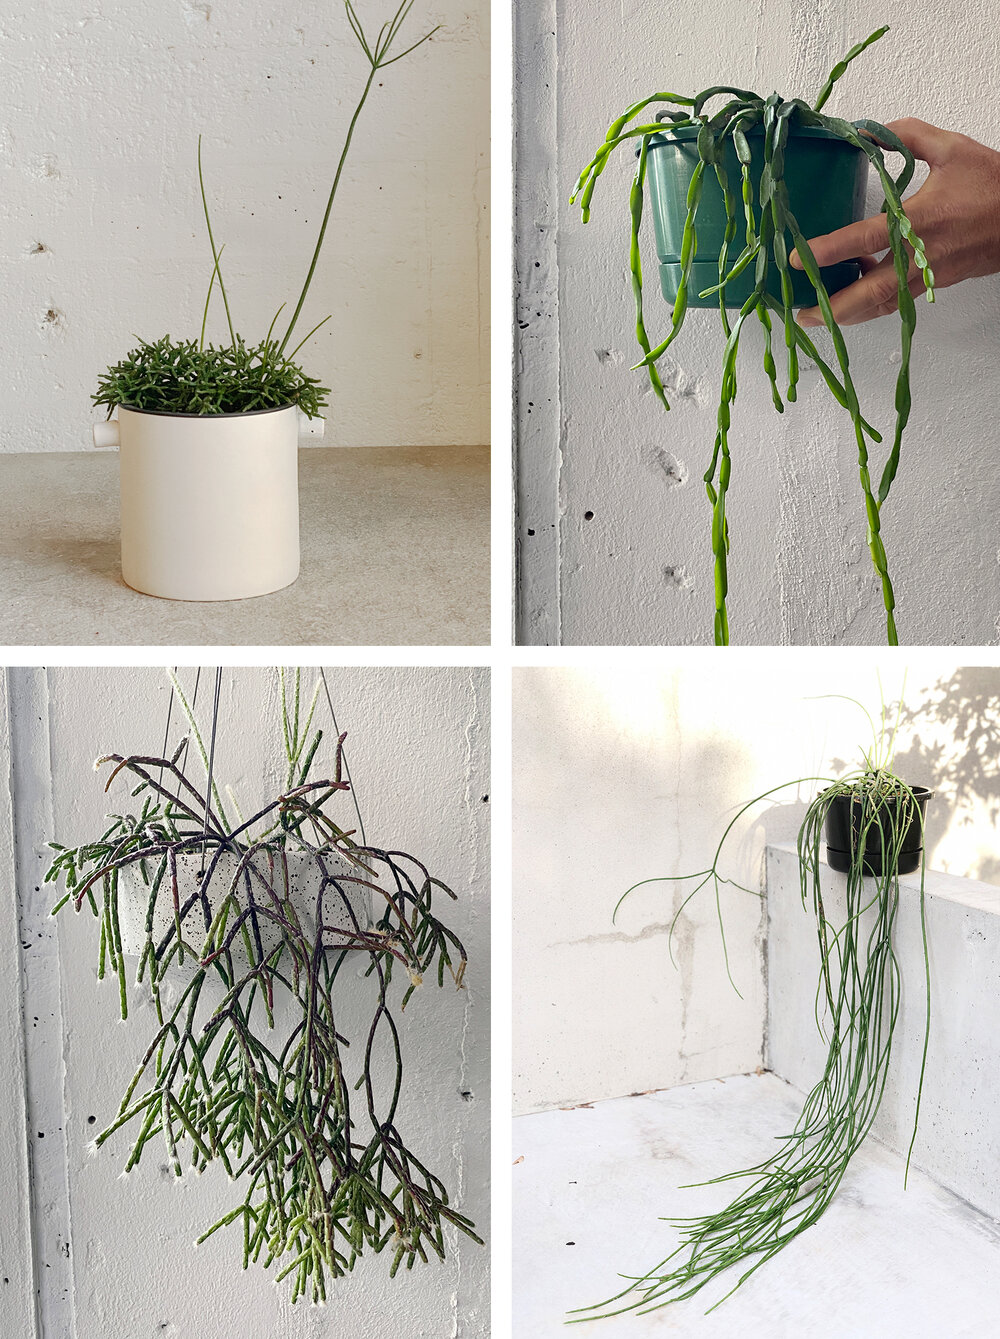 learn how to look after your rhipsalis — babylon store - pots